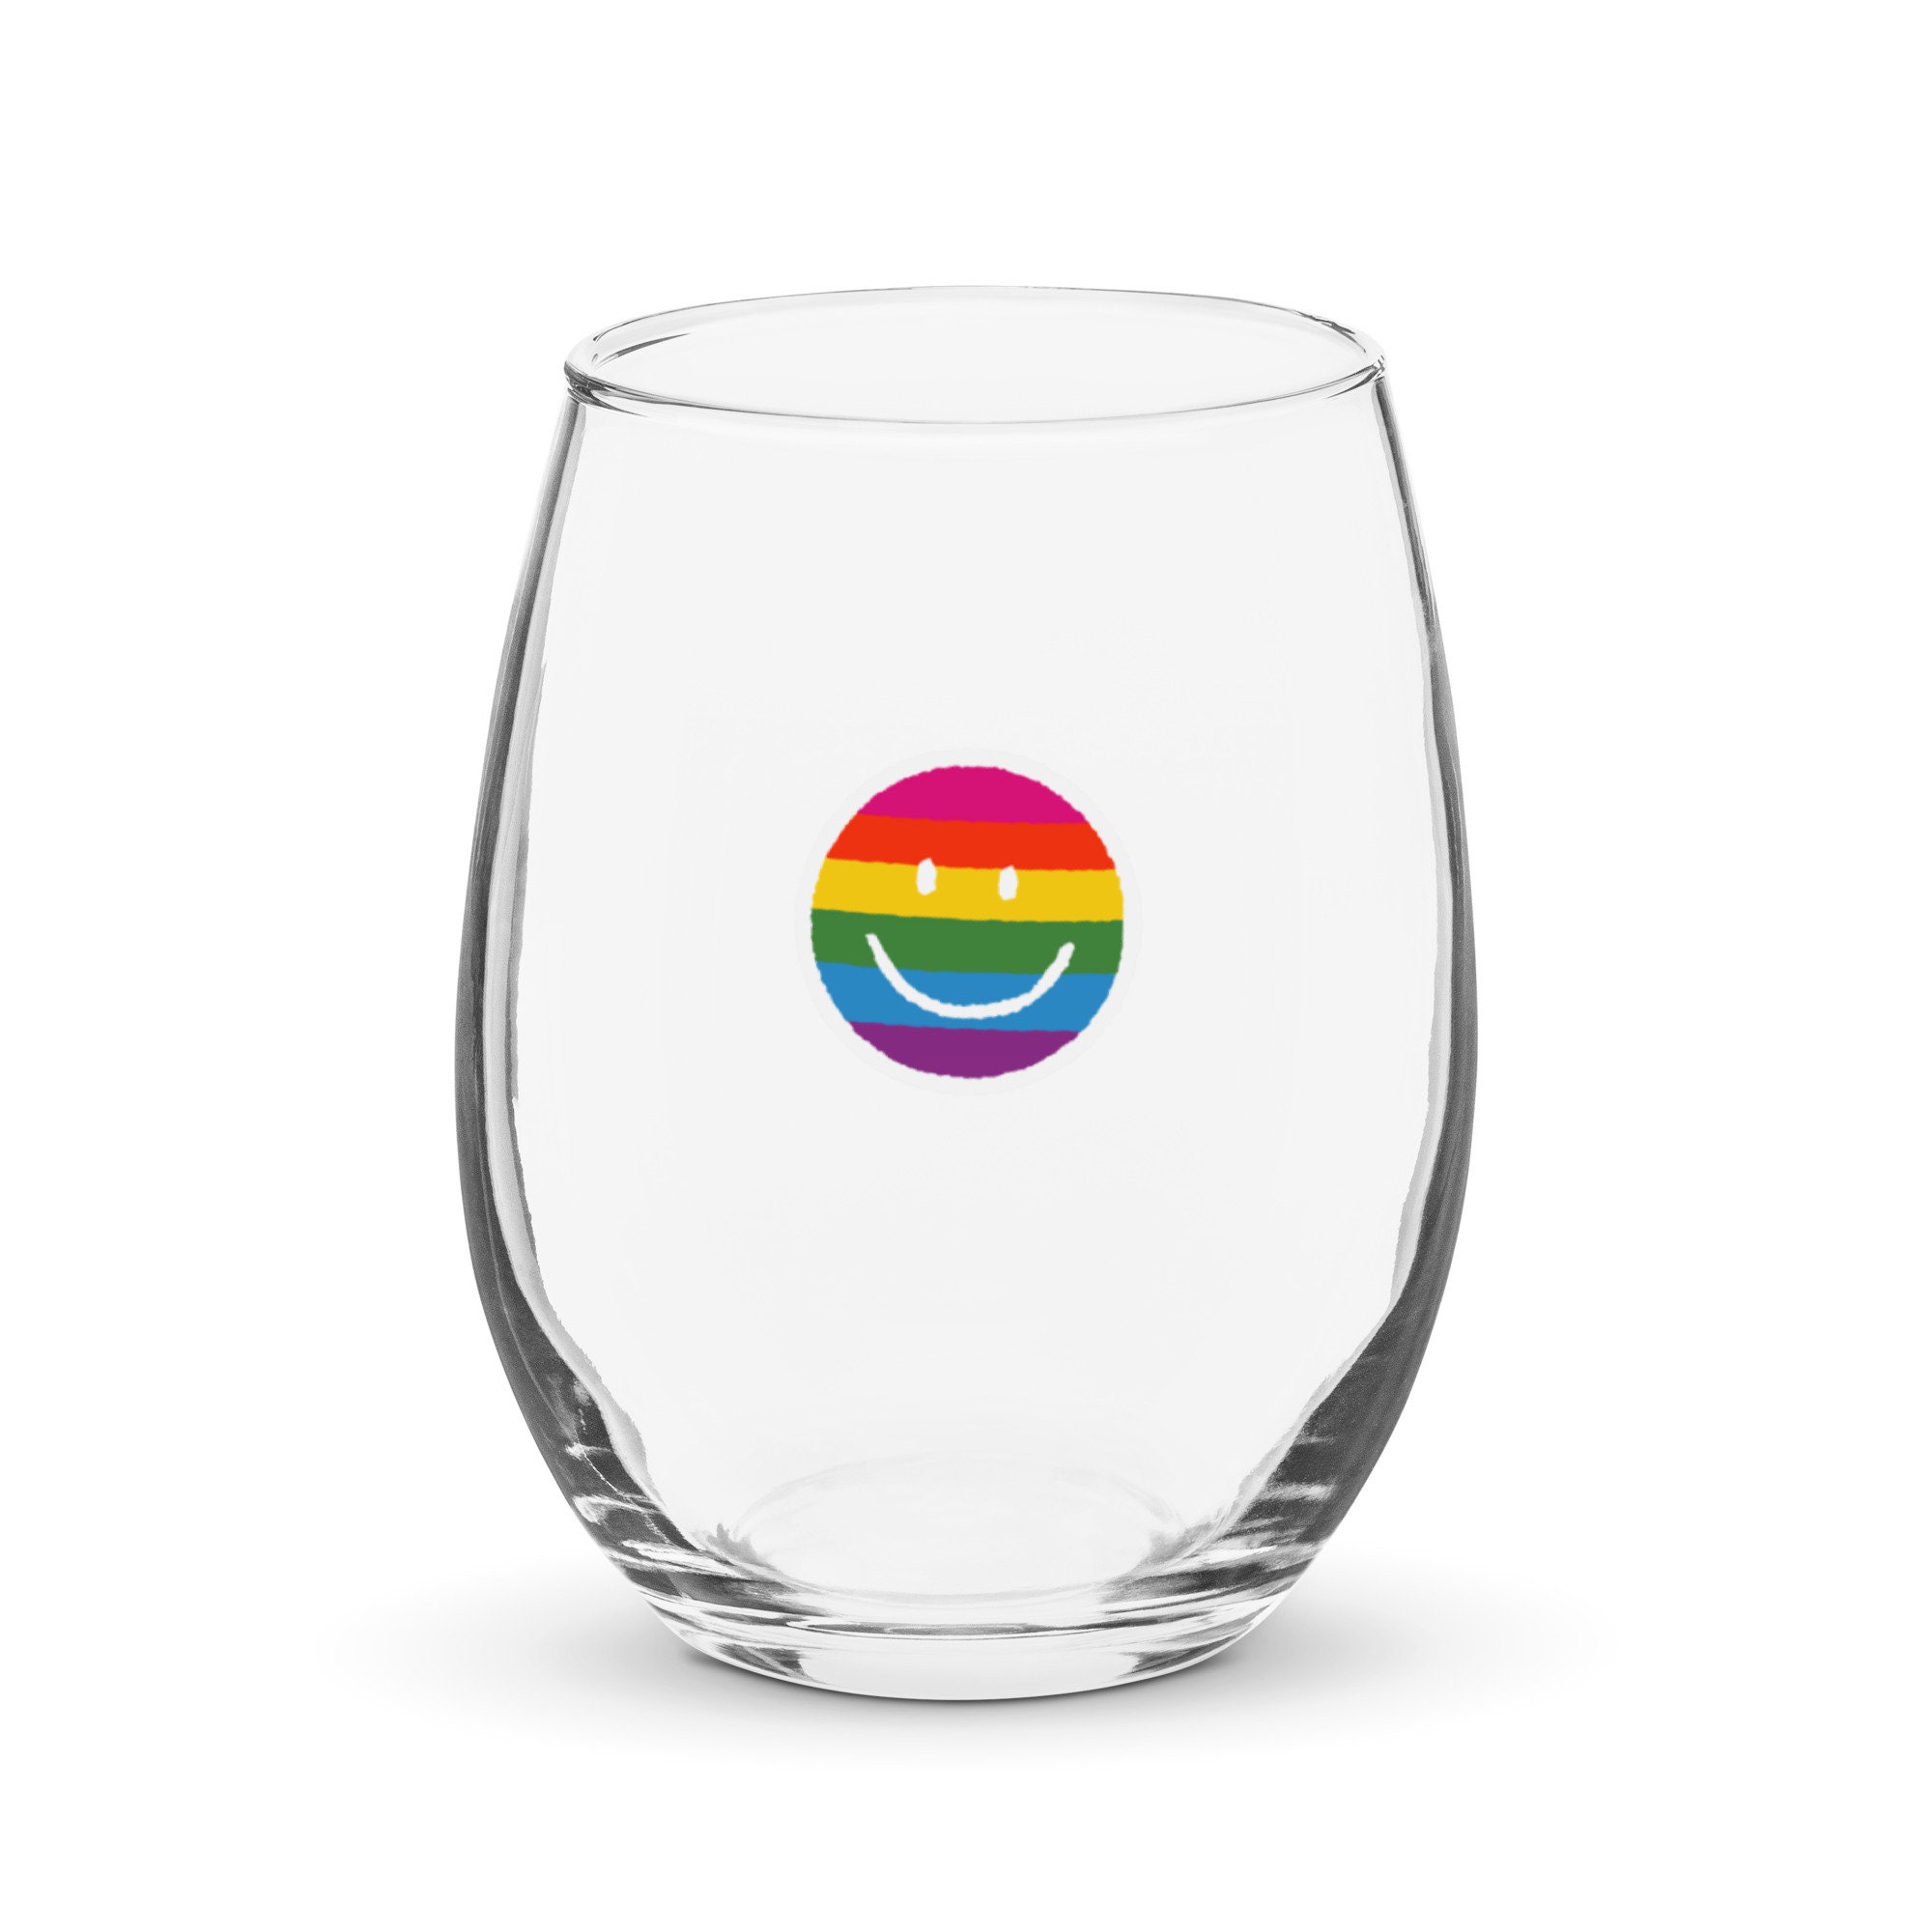 I Had to Deal With People Today Stemless Wine Glass. Introvert Wine Glass.  Funny Wine Glass. Wine Humor. Shatterproof Wine Glass Option. -  Norway